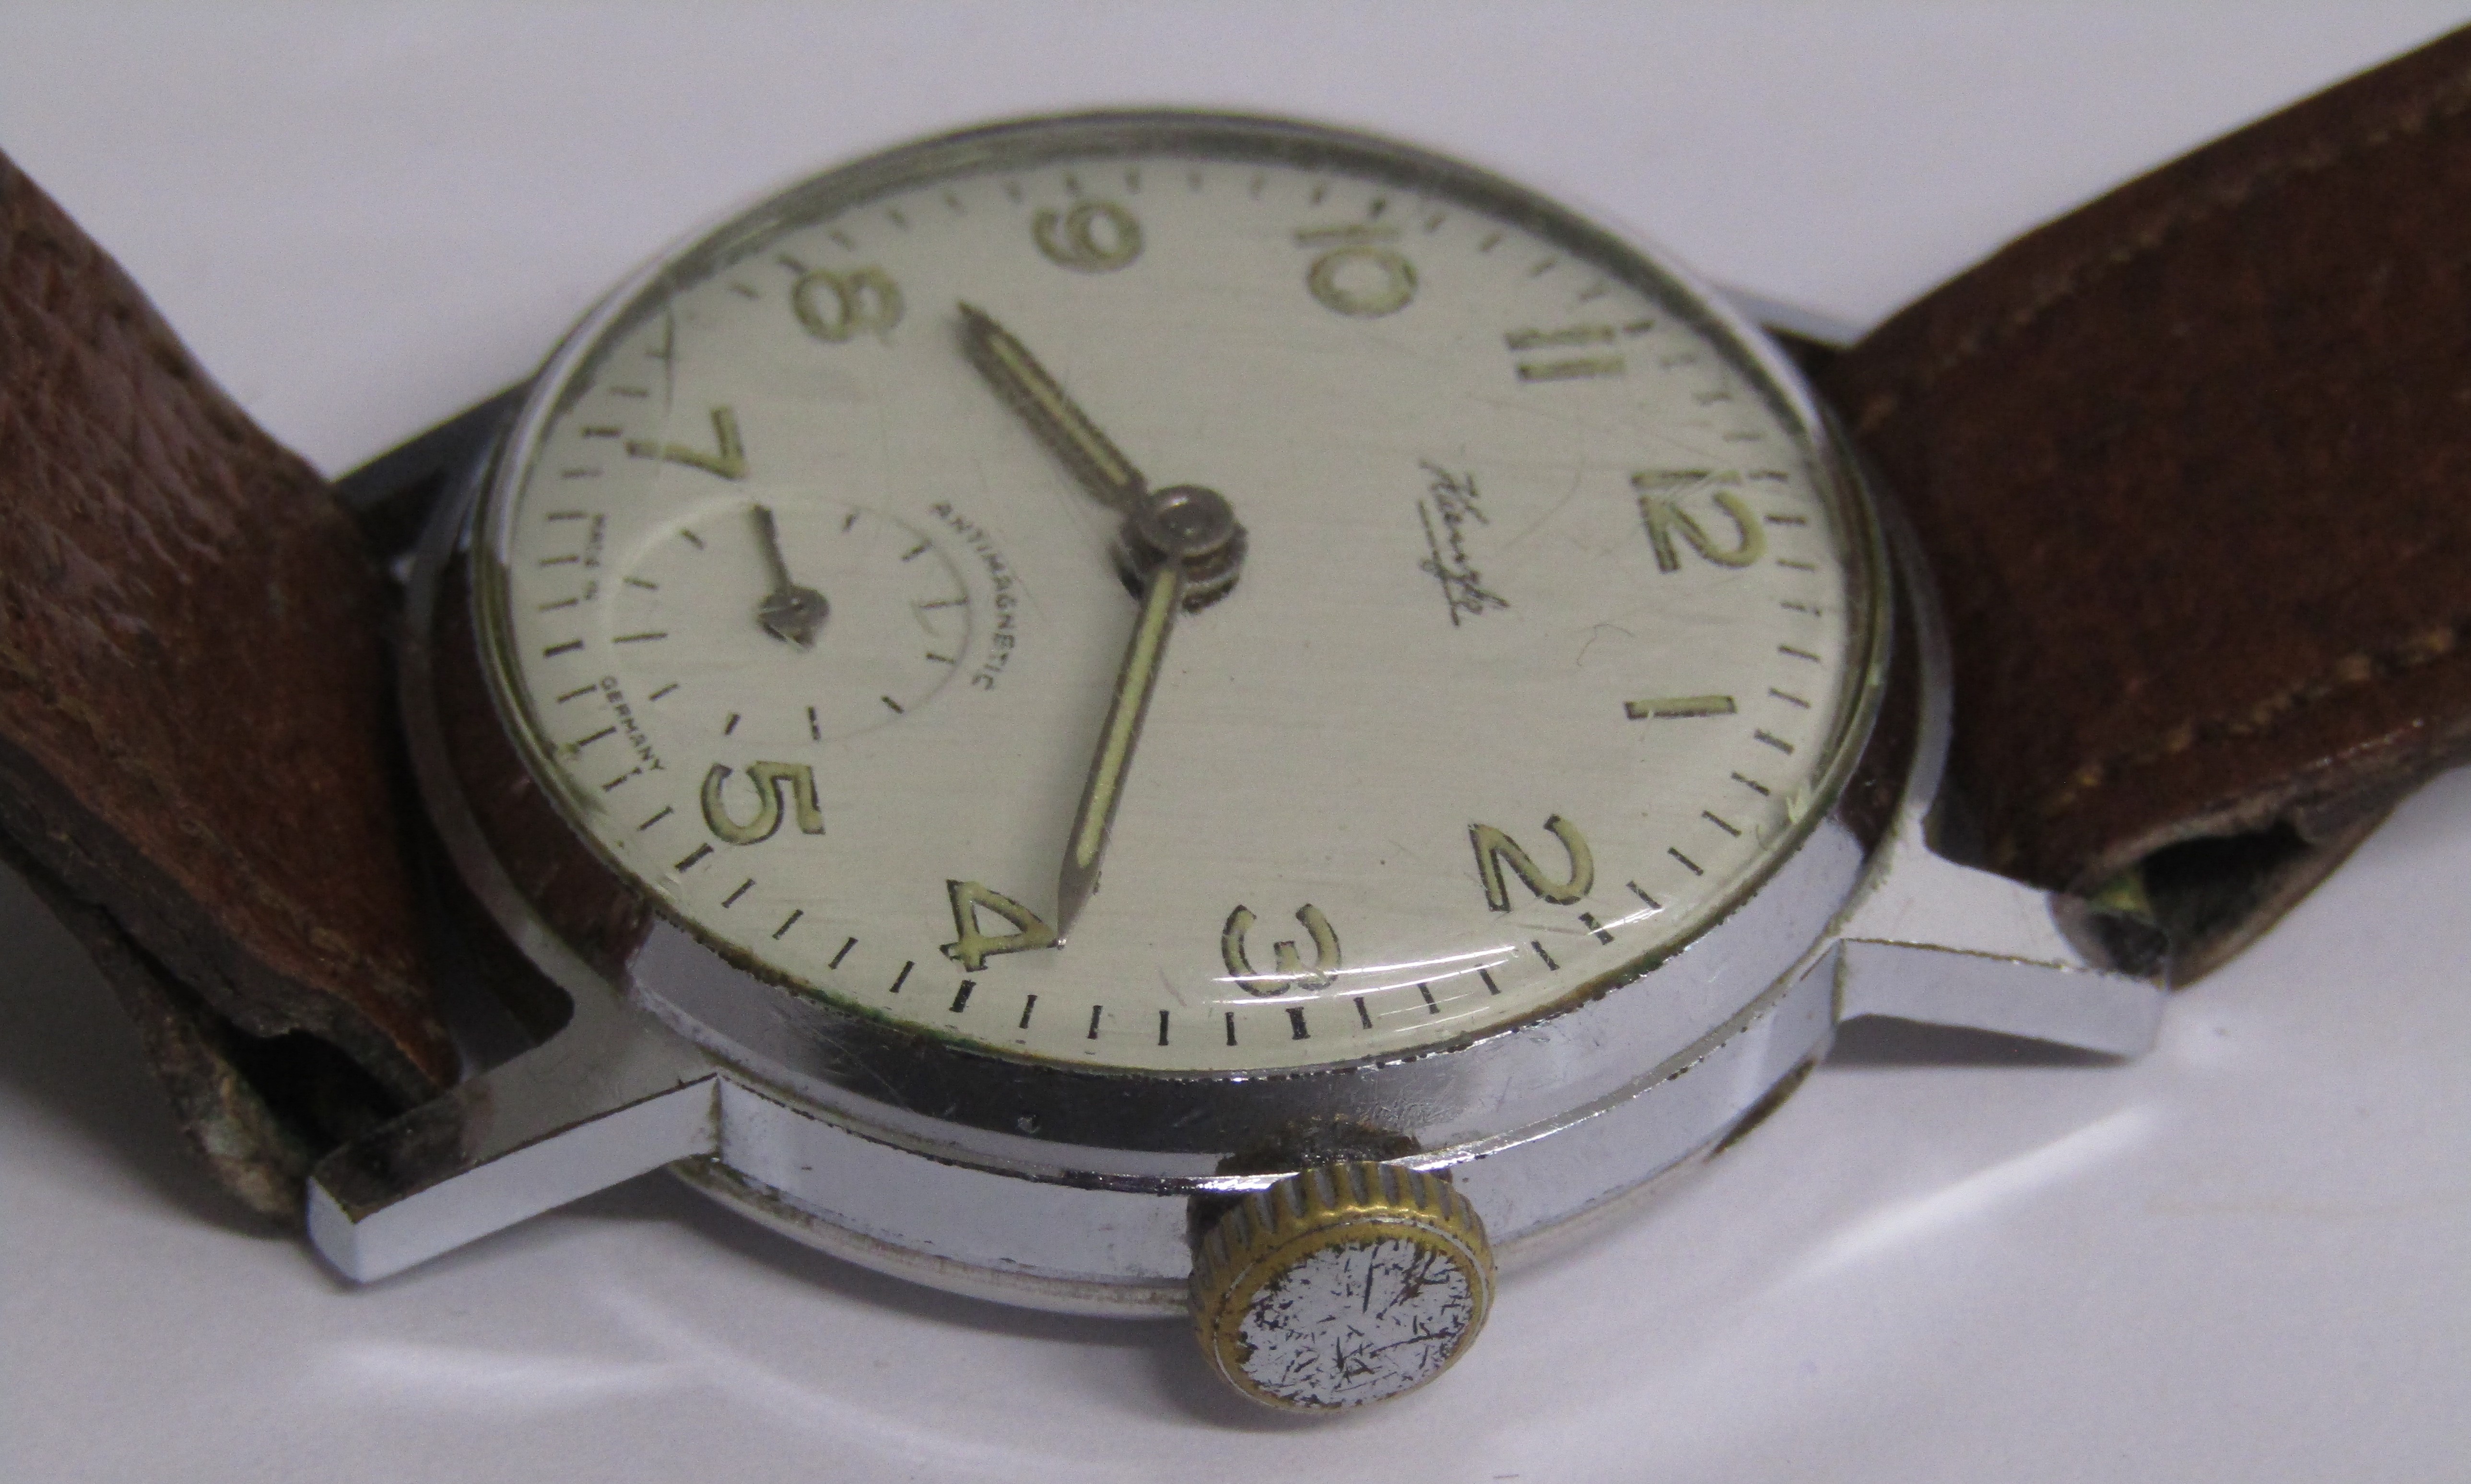 2 1950's Kienzle antimagnetic watches - one marked Foreign and the other Made in Germany with case - Image 6 of 9